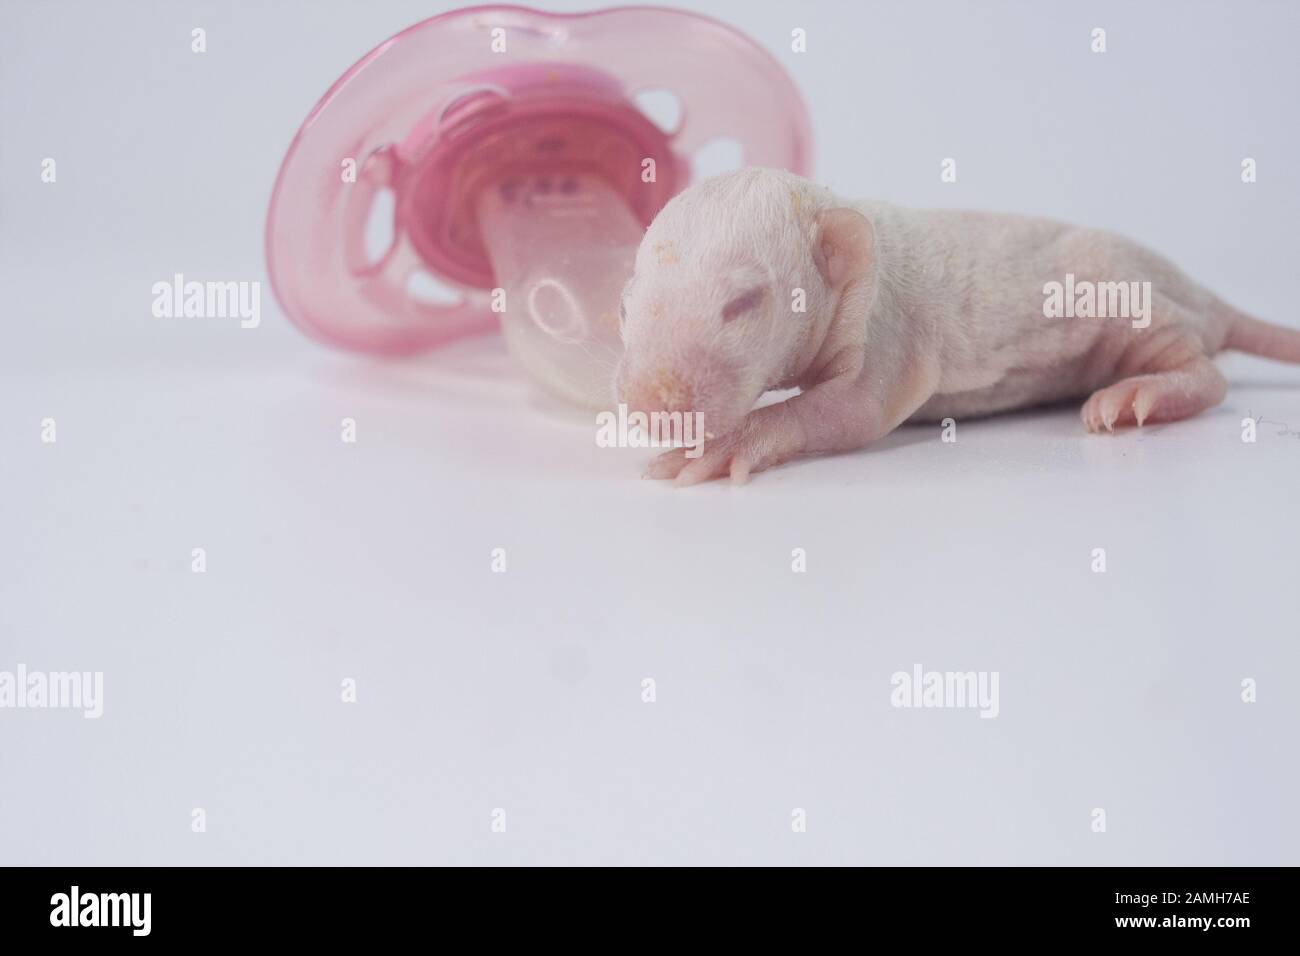 germ Rat baby without hair, newborn mouse with pink dummy latex pacifier.  2020 Chinese calendar. Asian New Year Stock Photo - Alamy